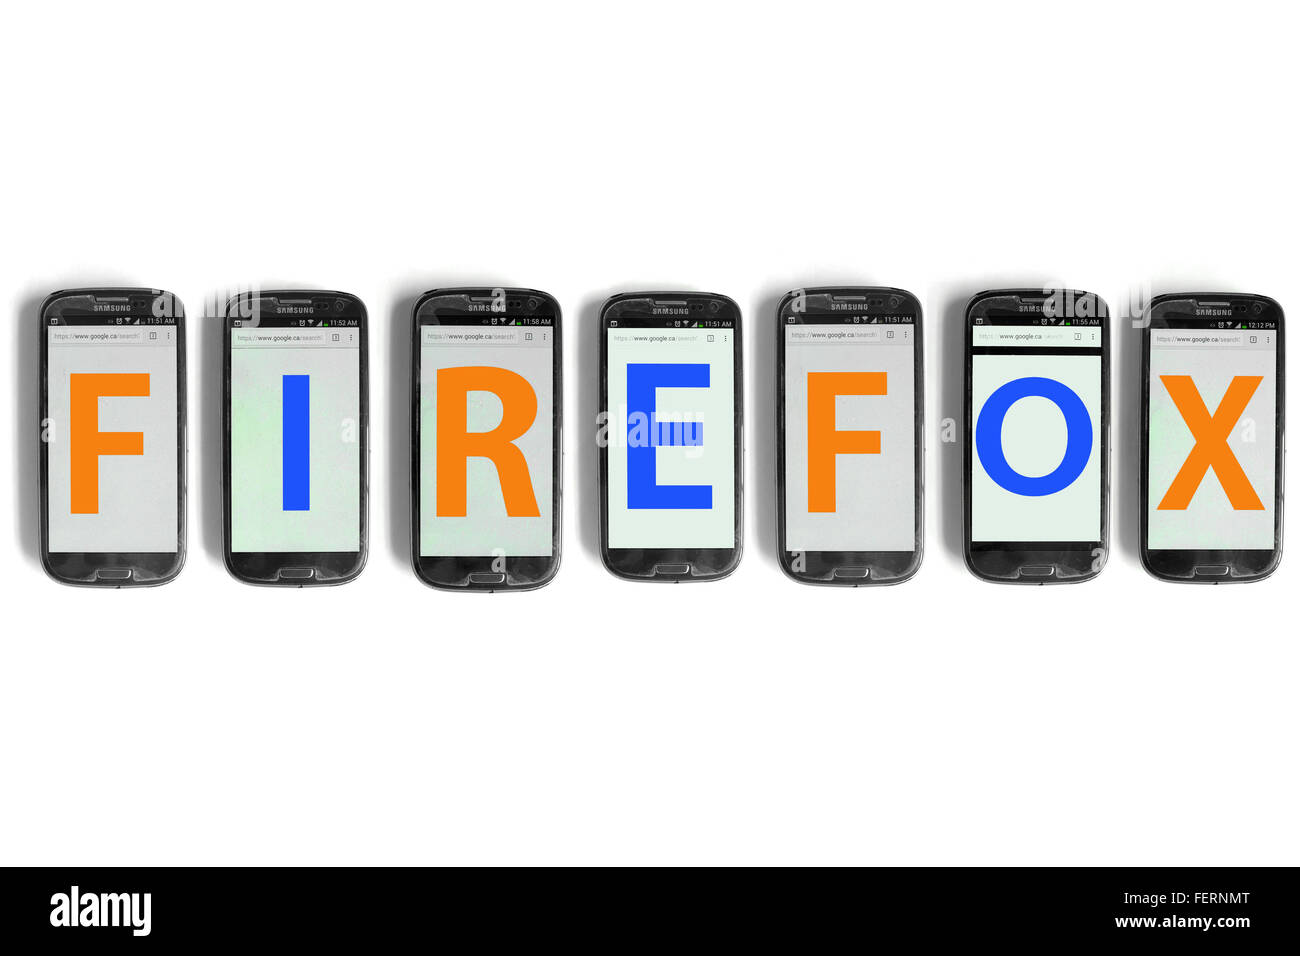 Firefox on the screens of smartphones photographed against a white background. Stock Photo